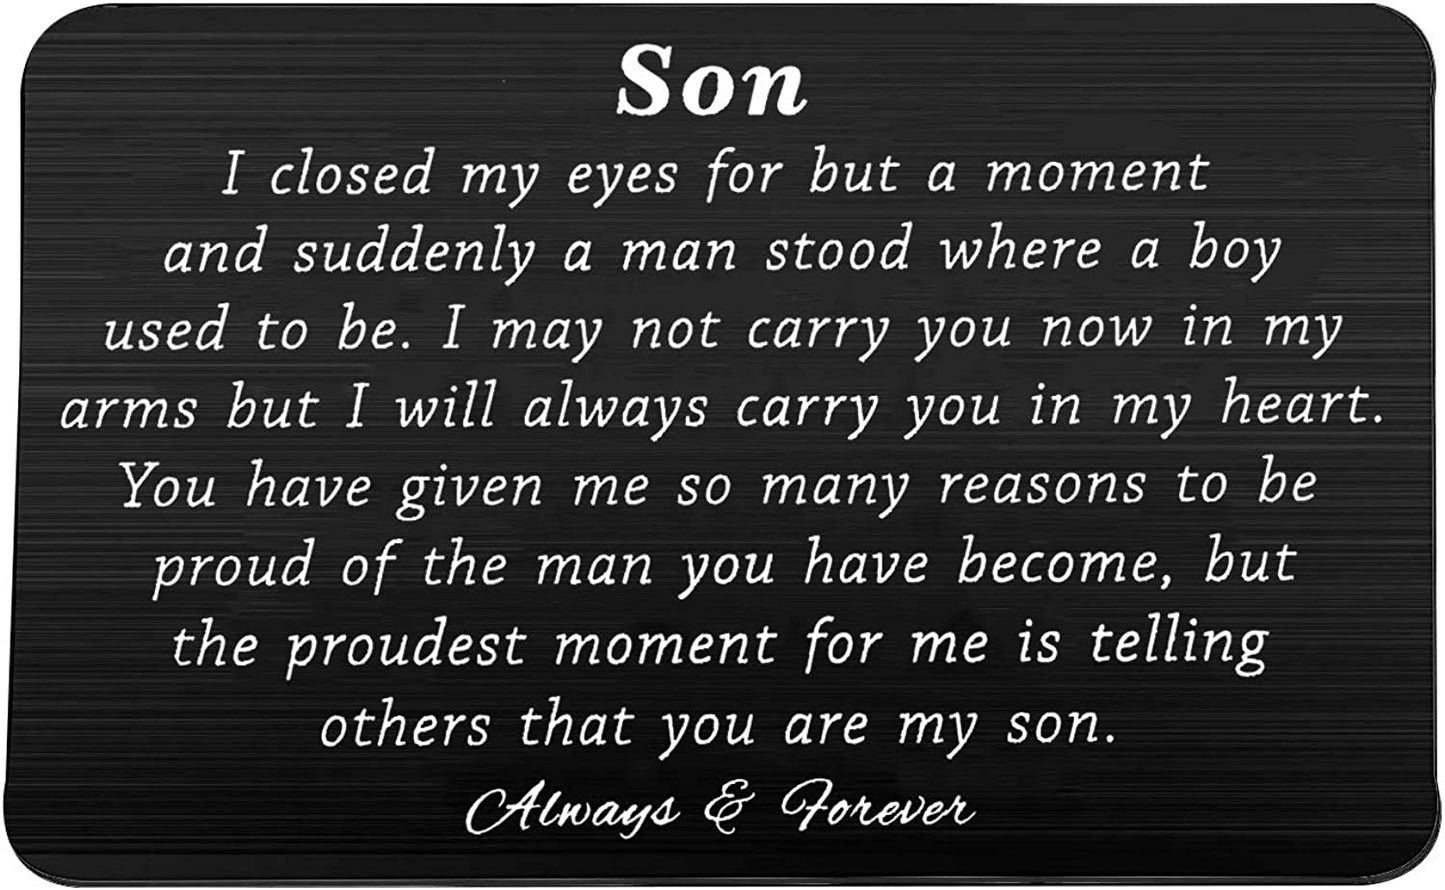 My Son Wallet Card Proud of You Gifts I Closed My Eyes for A Moment Engraved Wallet Card for Son for Men